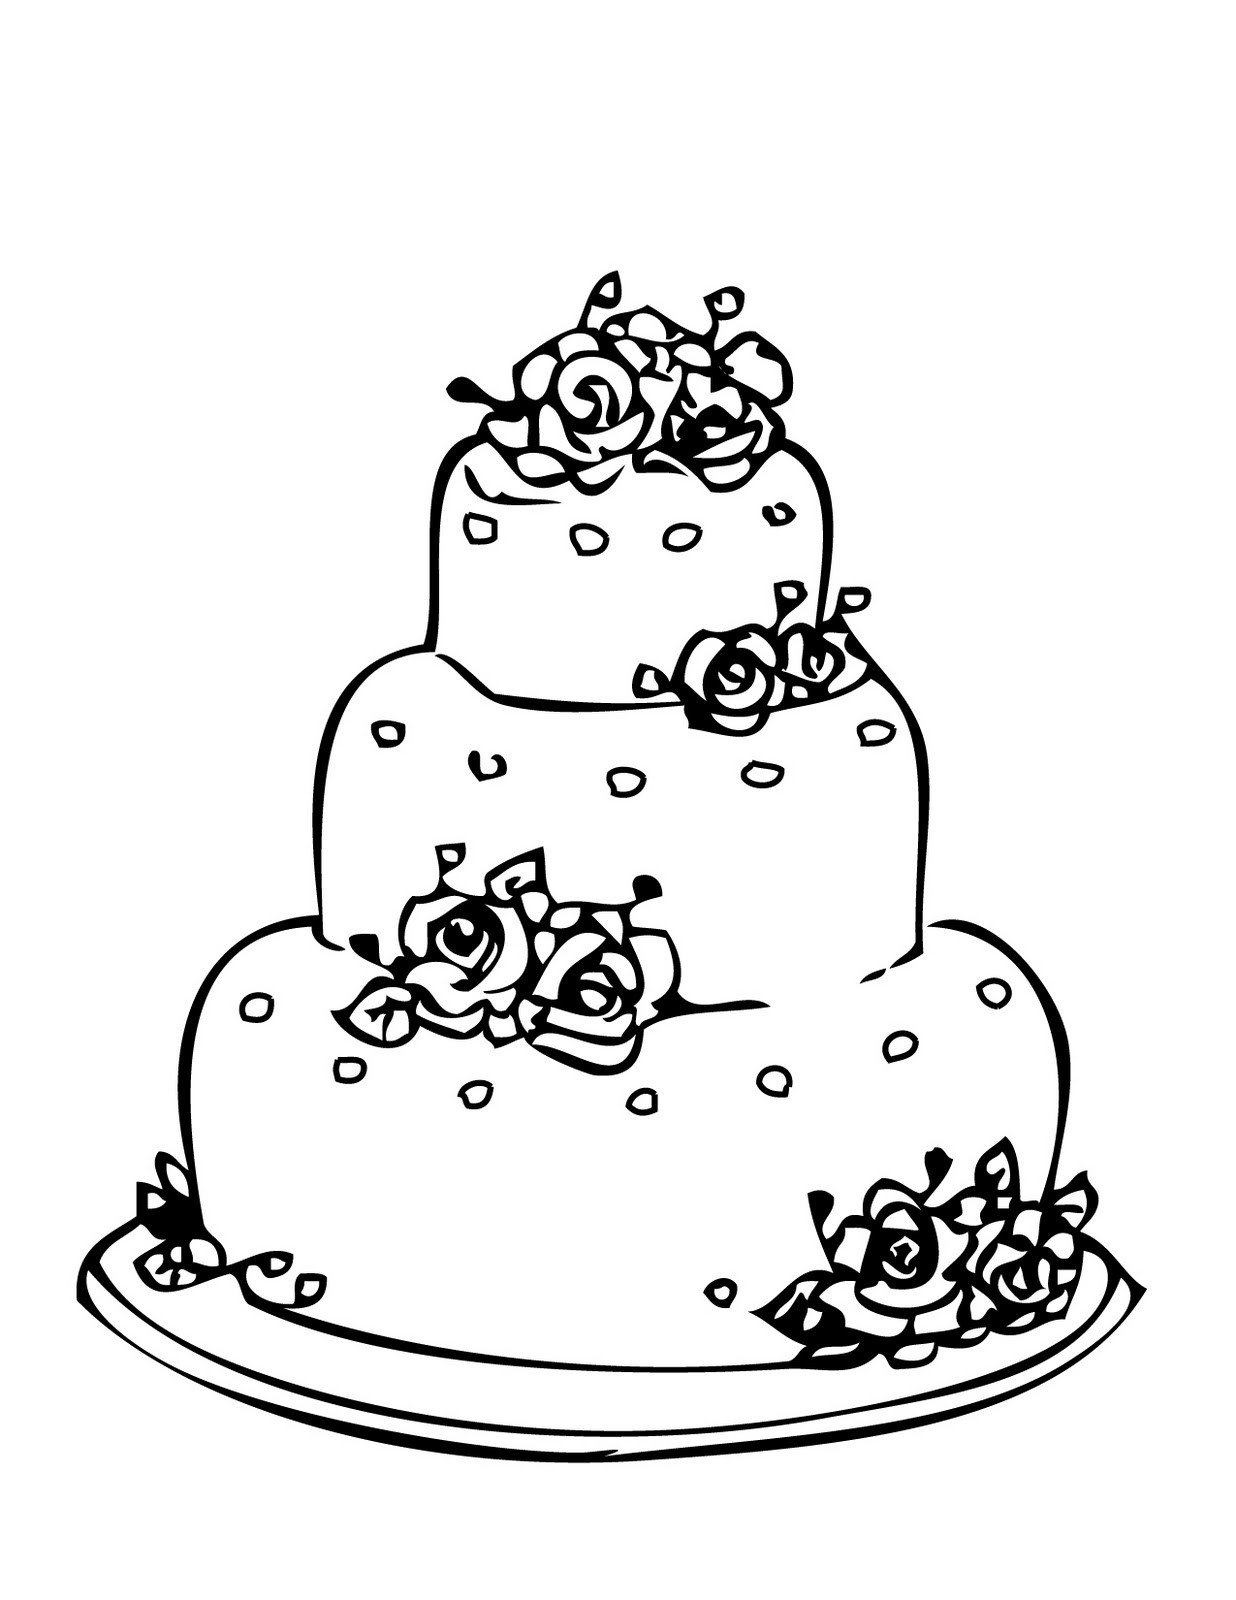 Wedding Cakes Coloring Pages
 Round Wedding Cake Coloring Pages to printing